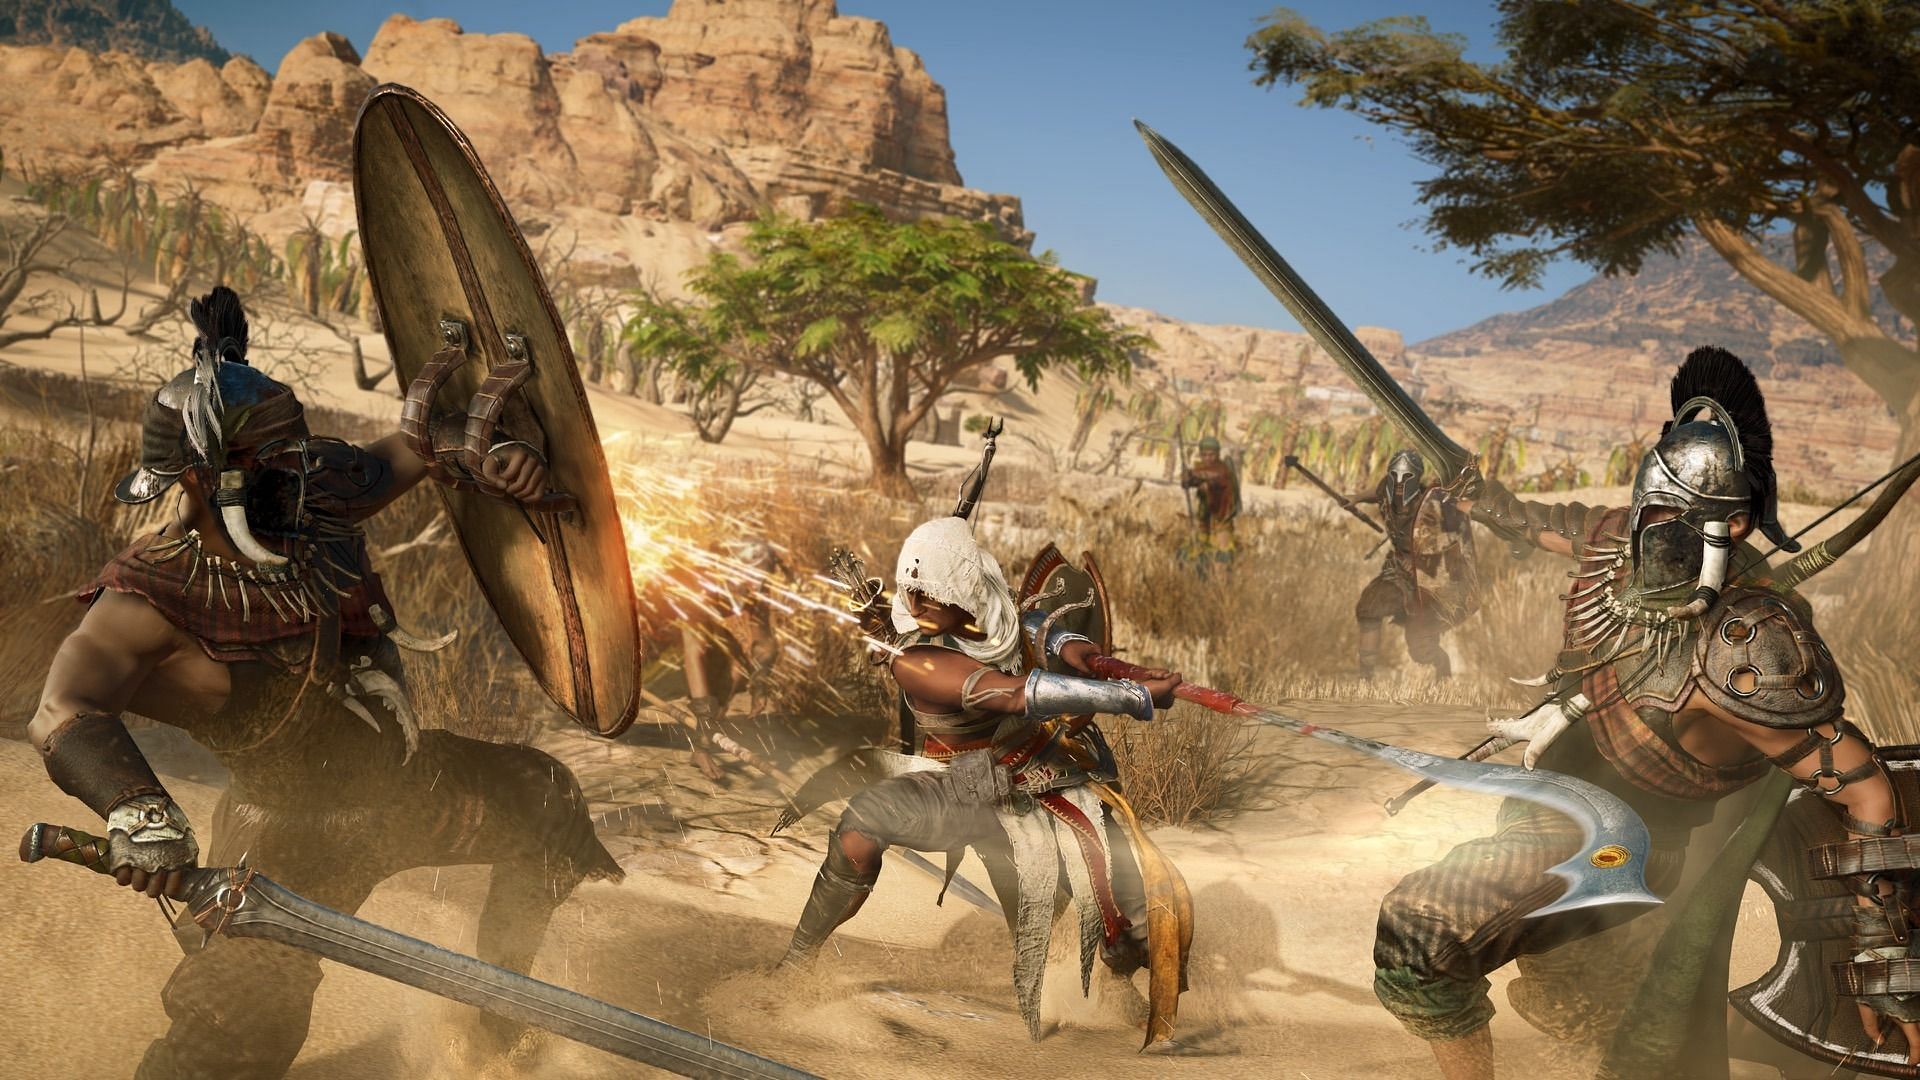 Assassin&rsquo;s Creed Origins finally gets the 60fps patch (Image by Ubisoft)